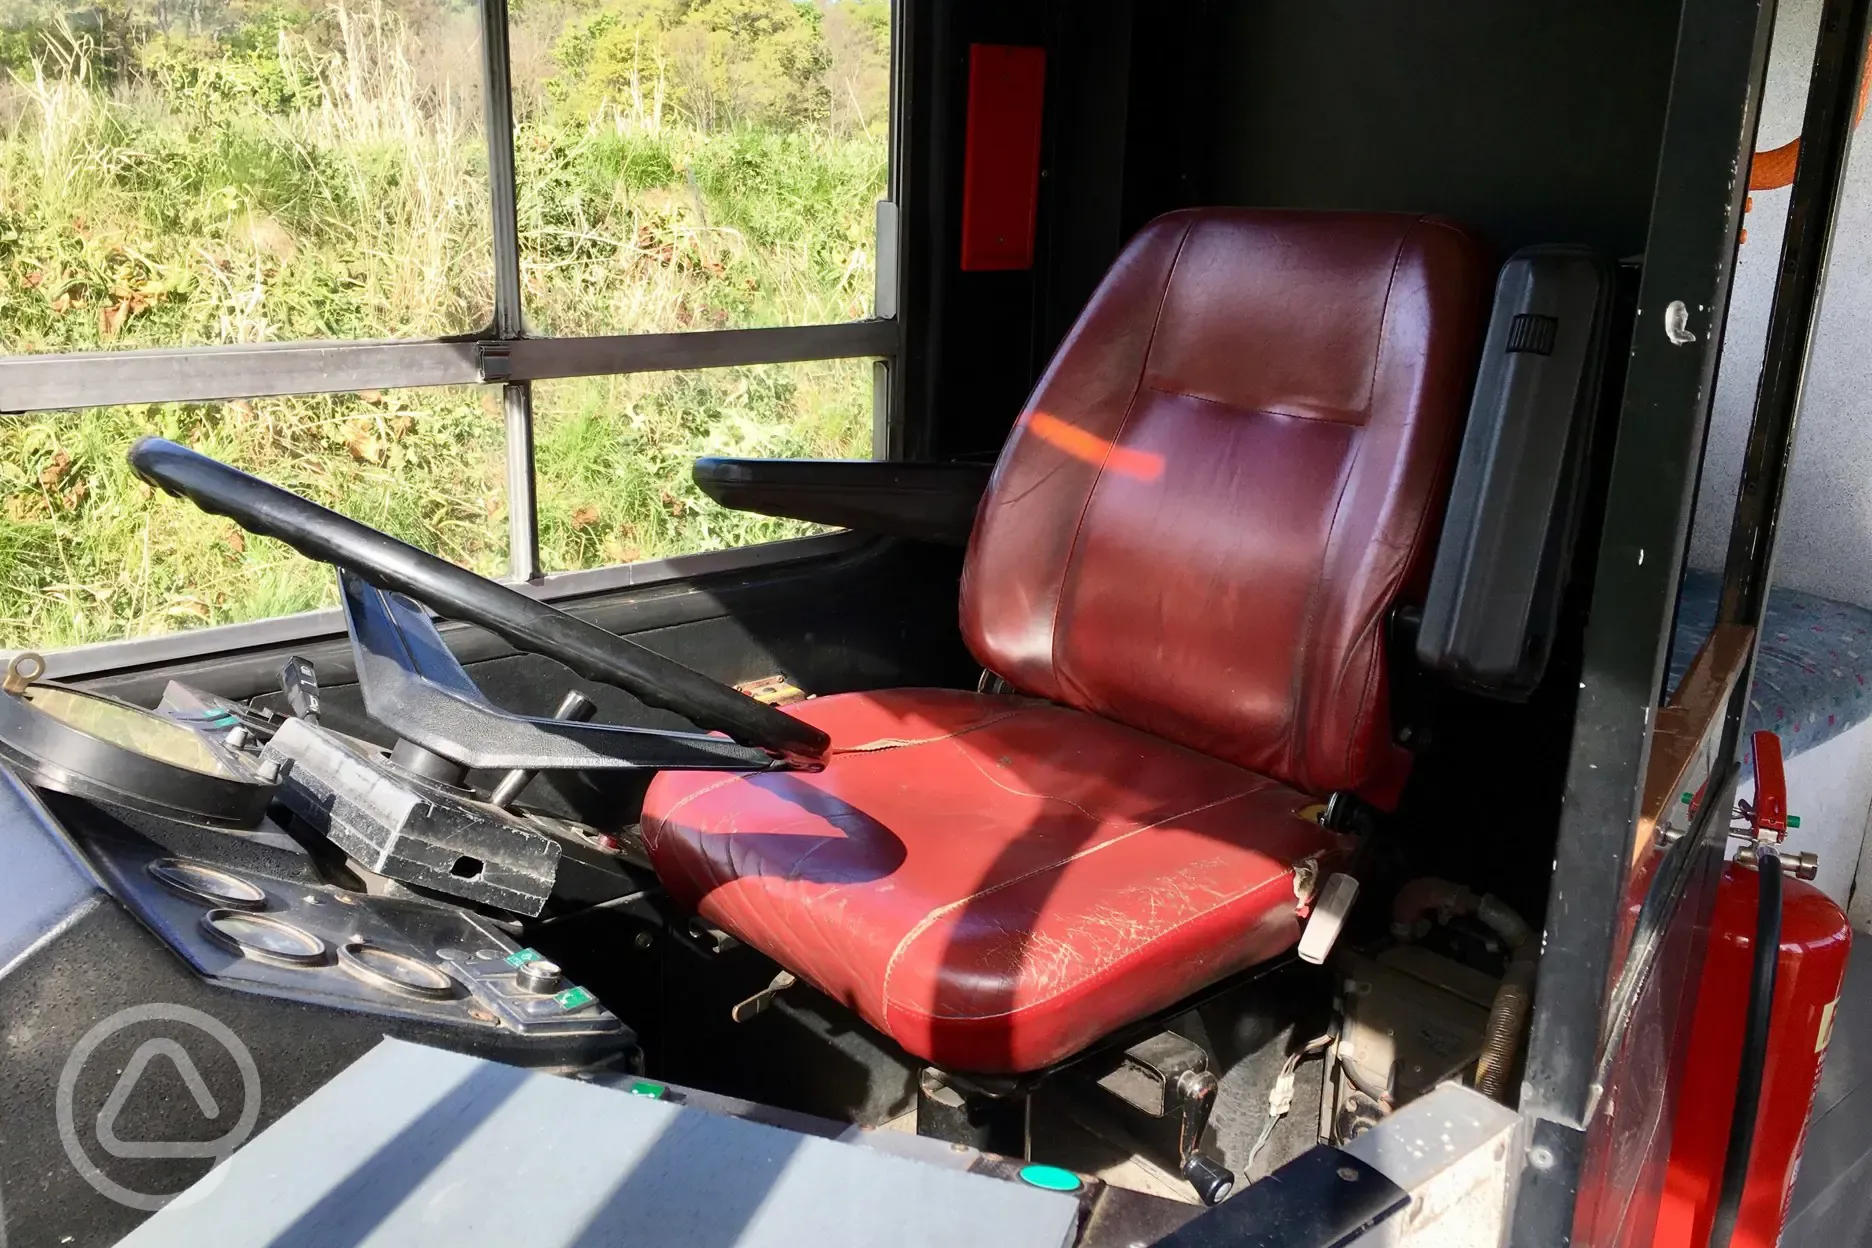 Eco bus drivers seat